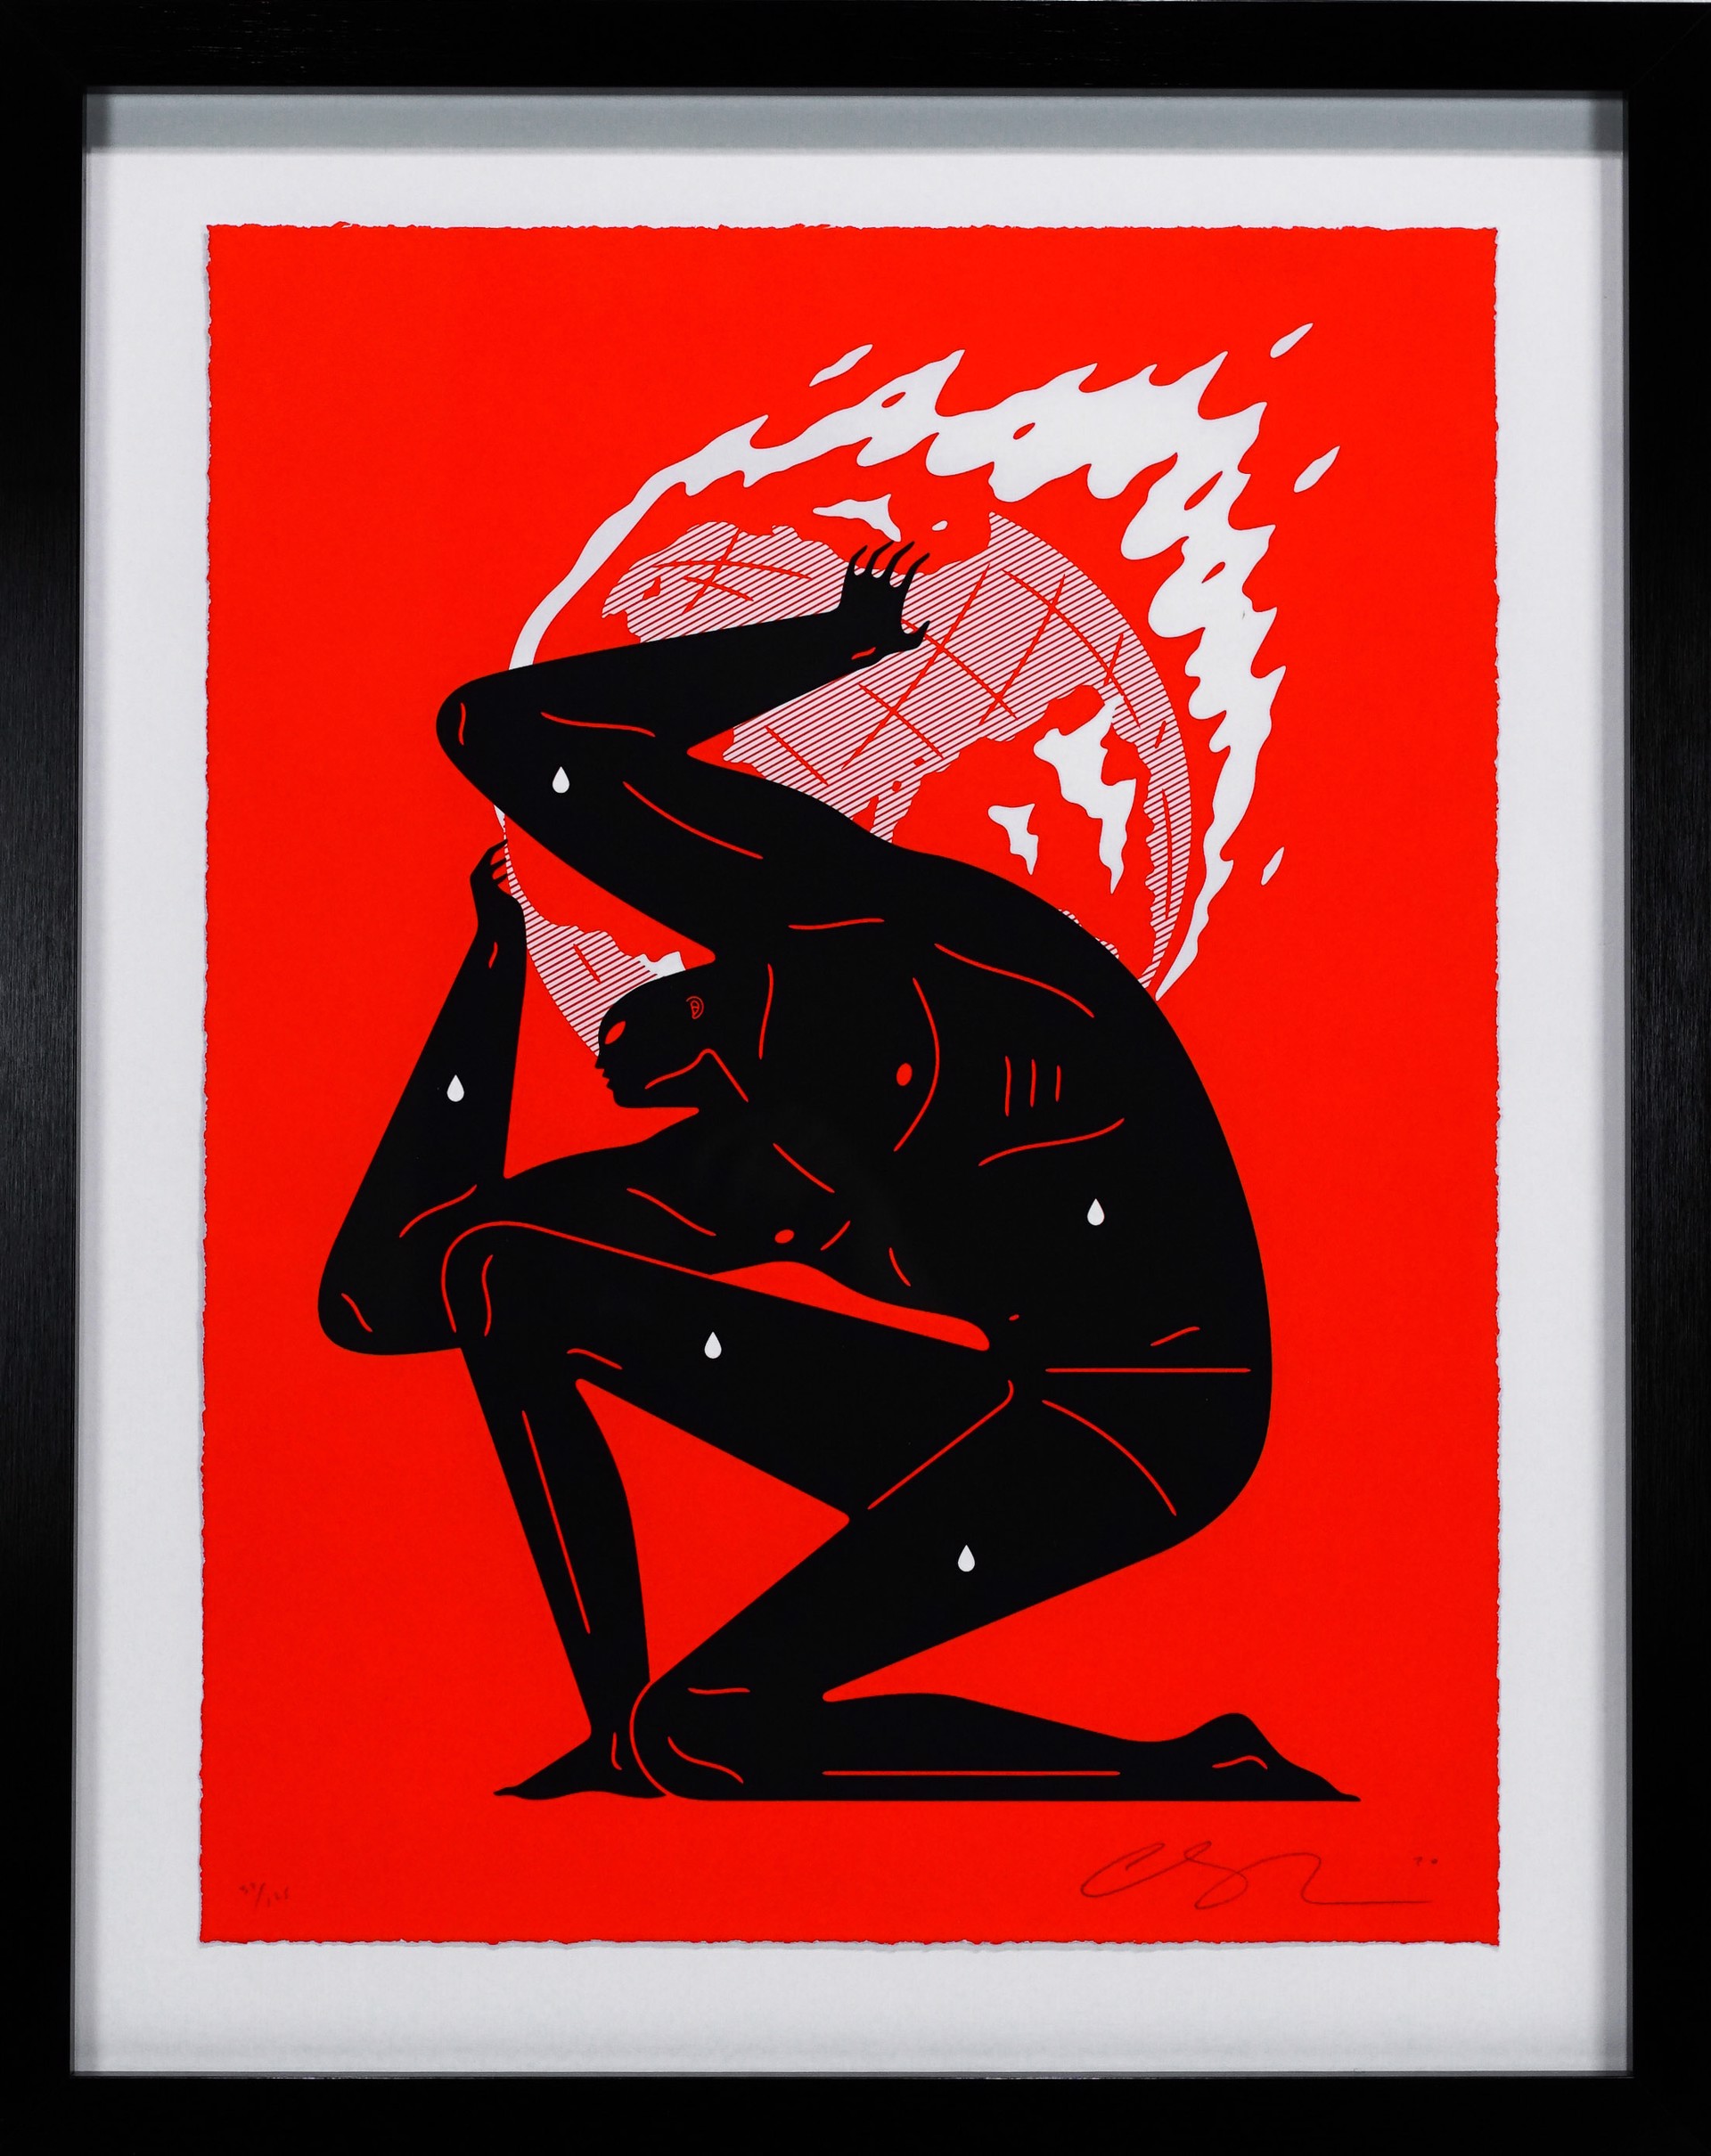 World on Fire (Red), (37,125) by Cleon Peterson